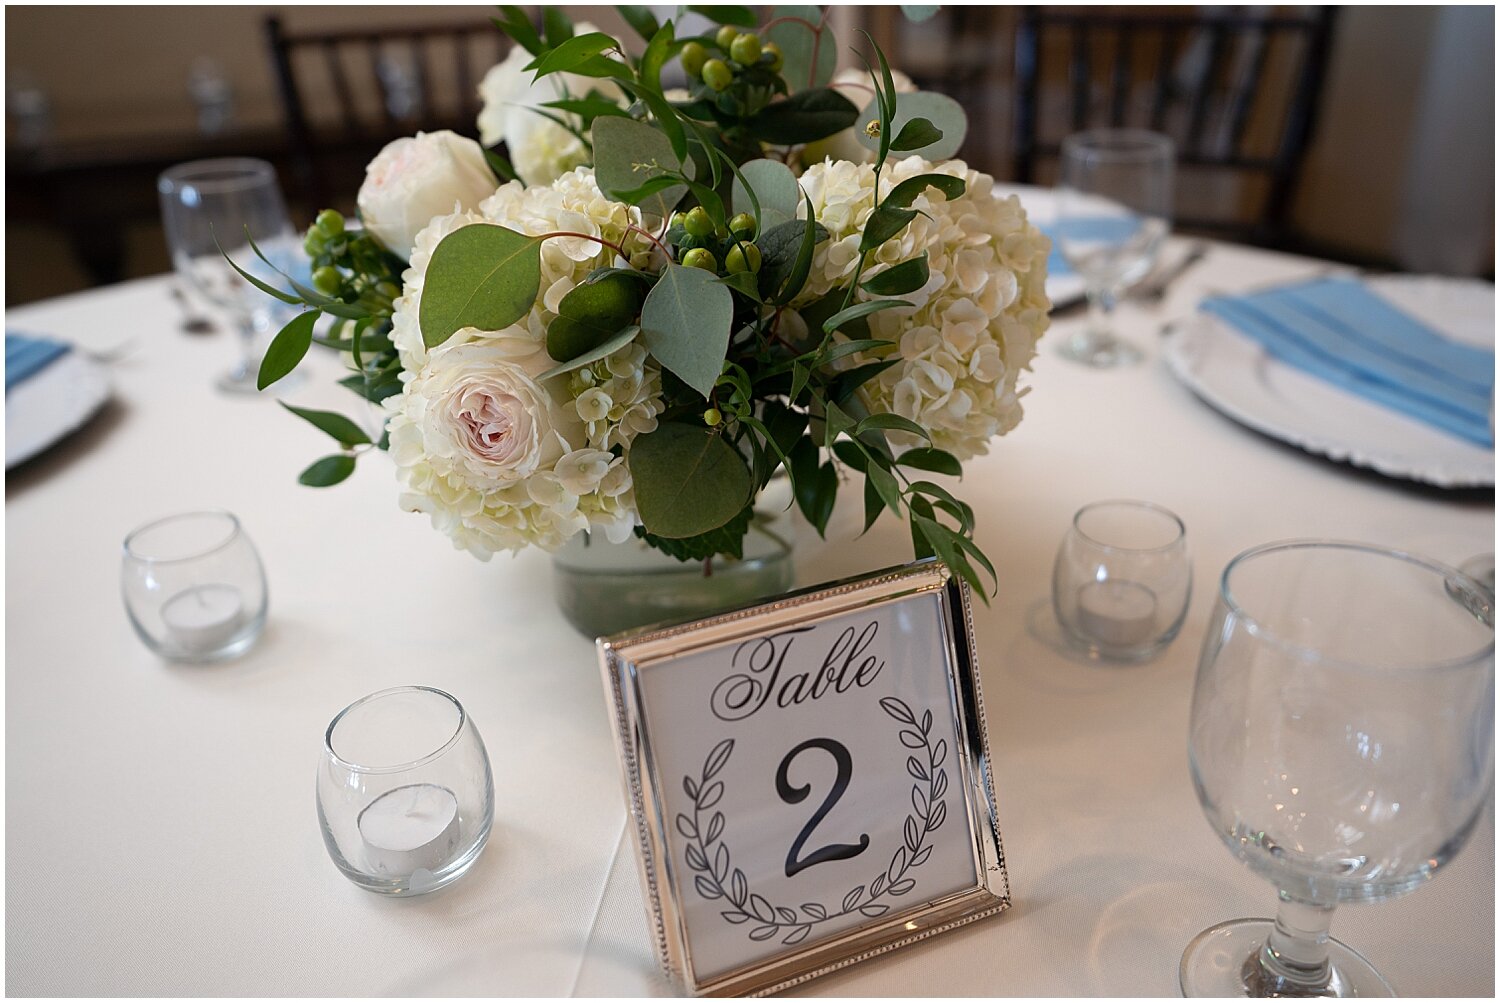  Table sign and white floral centerpiece 